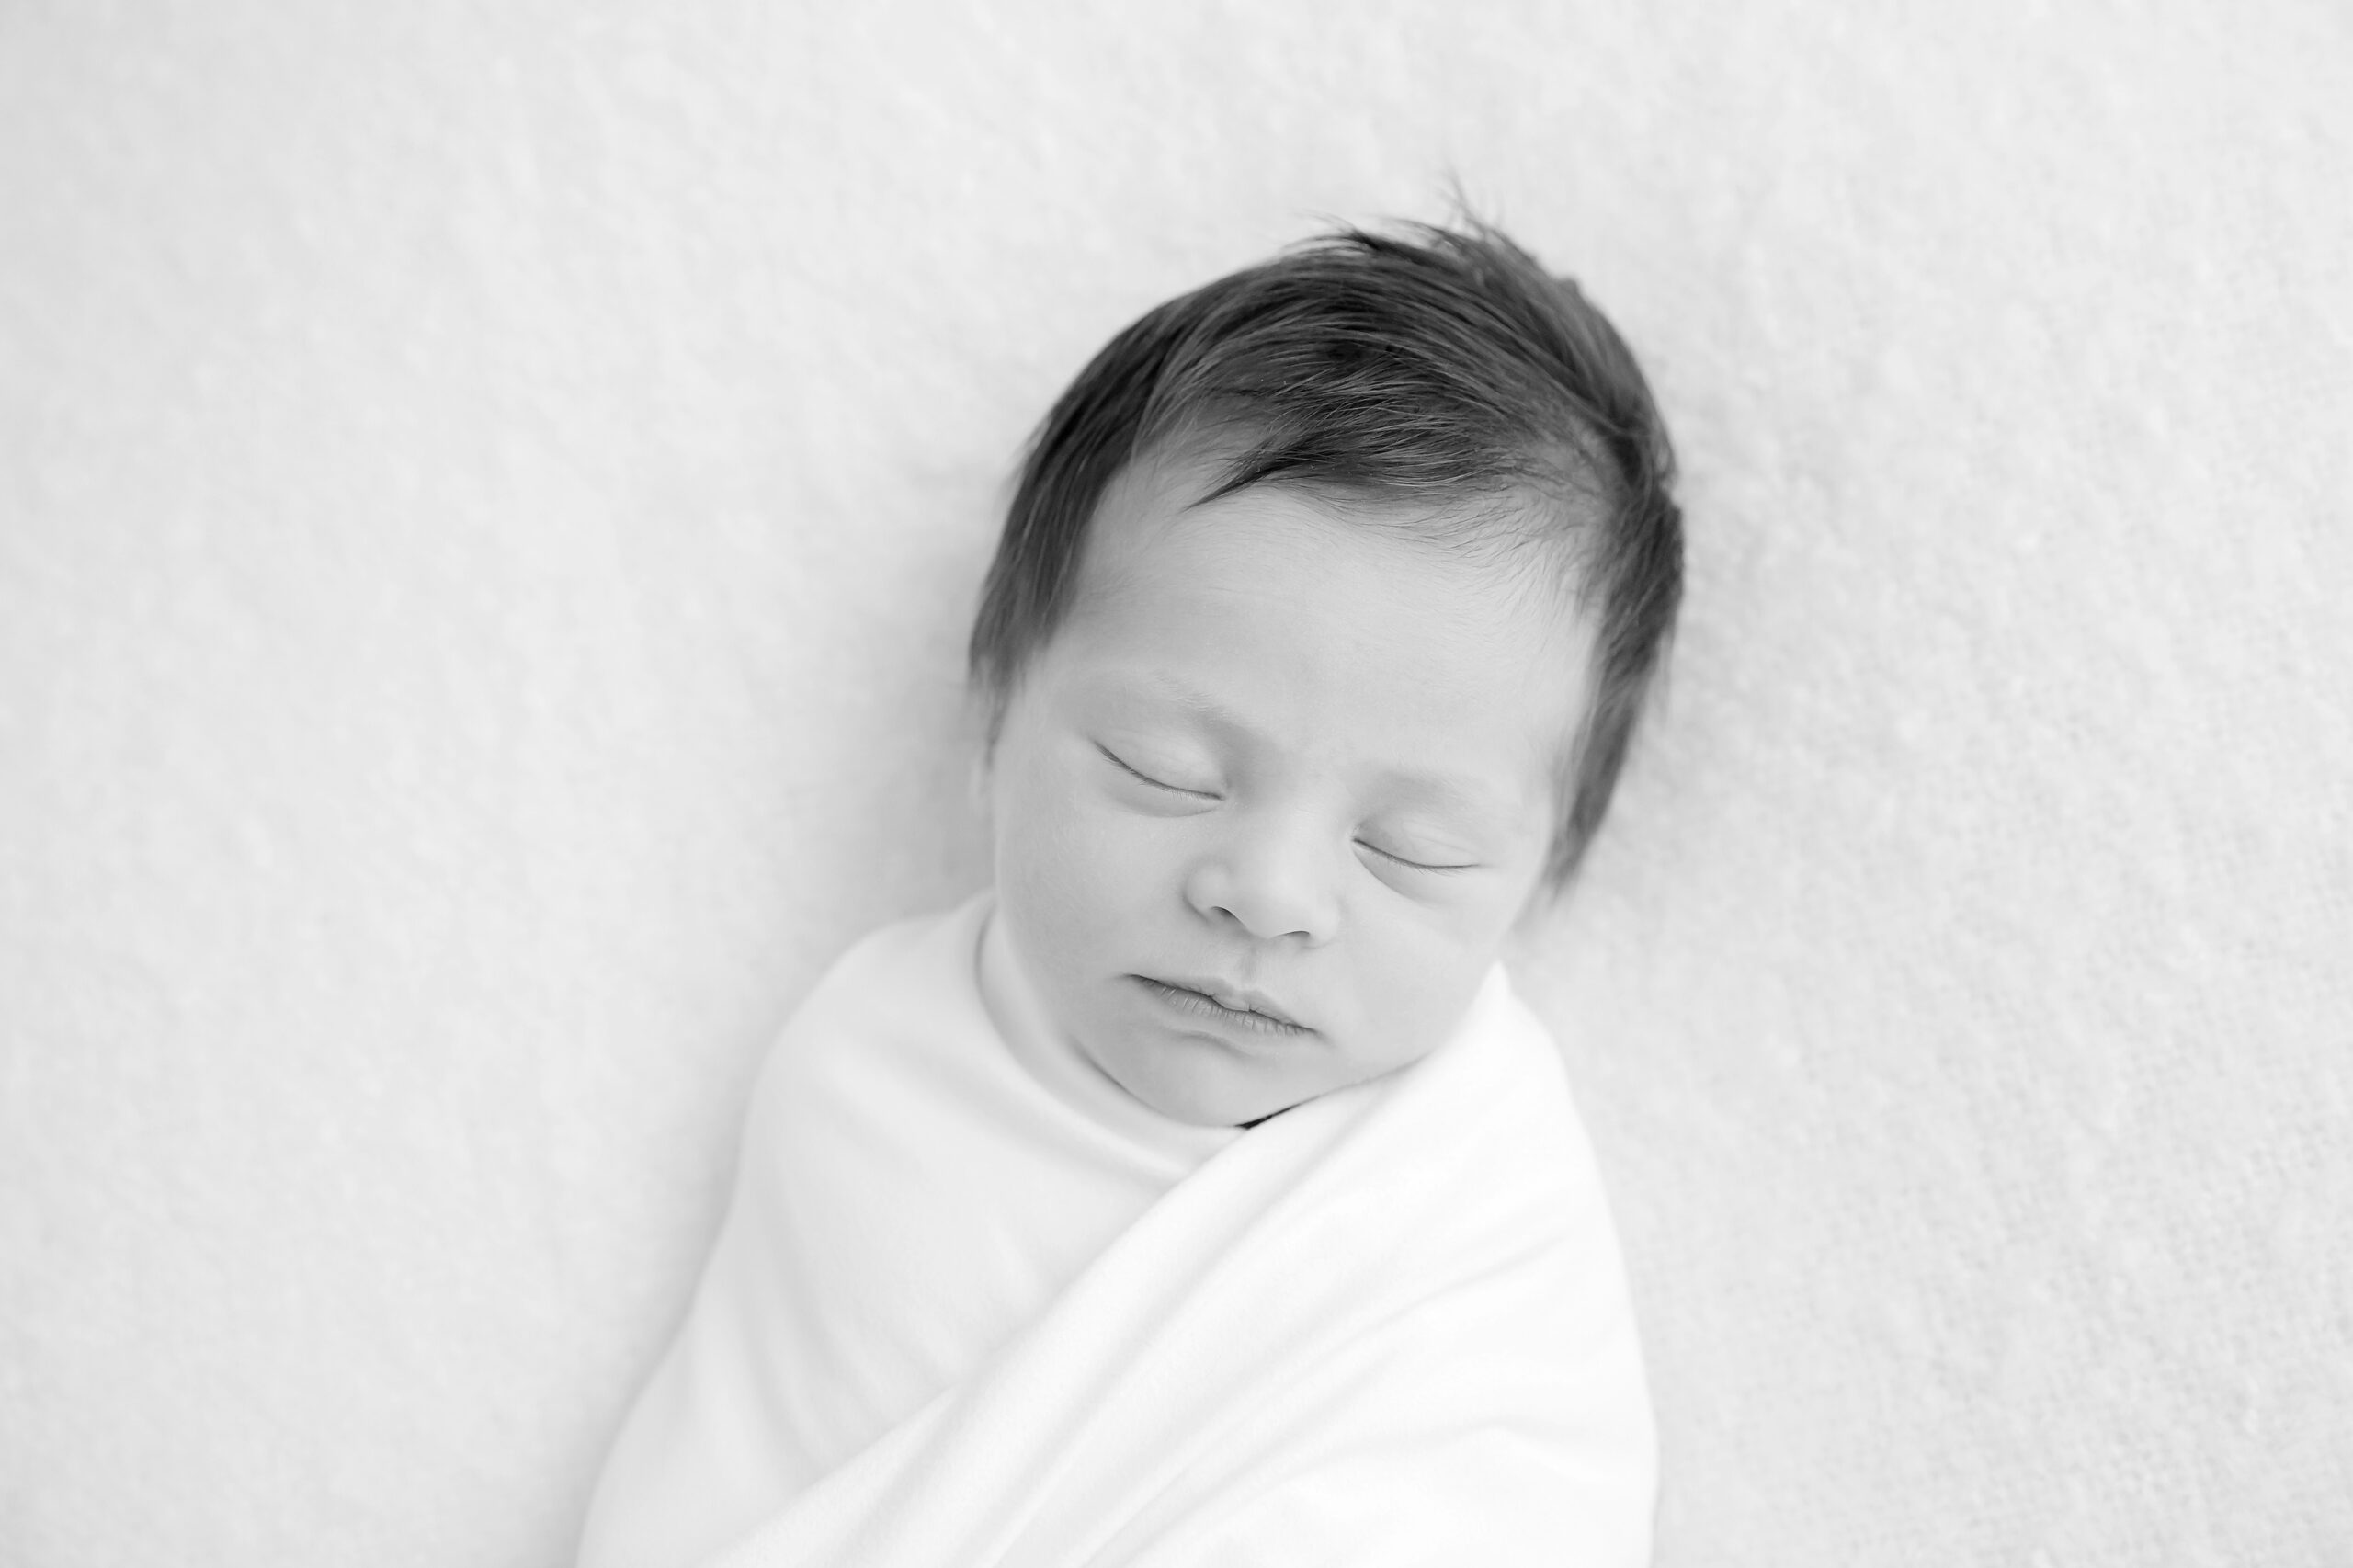 Black and white photo of a newborn baby girl with a head of dark hair, wrapped in a white swaddle